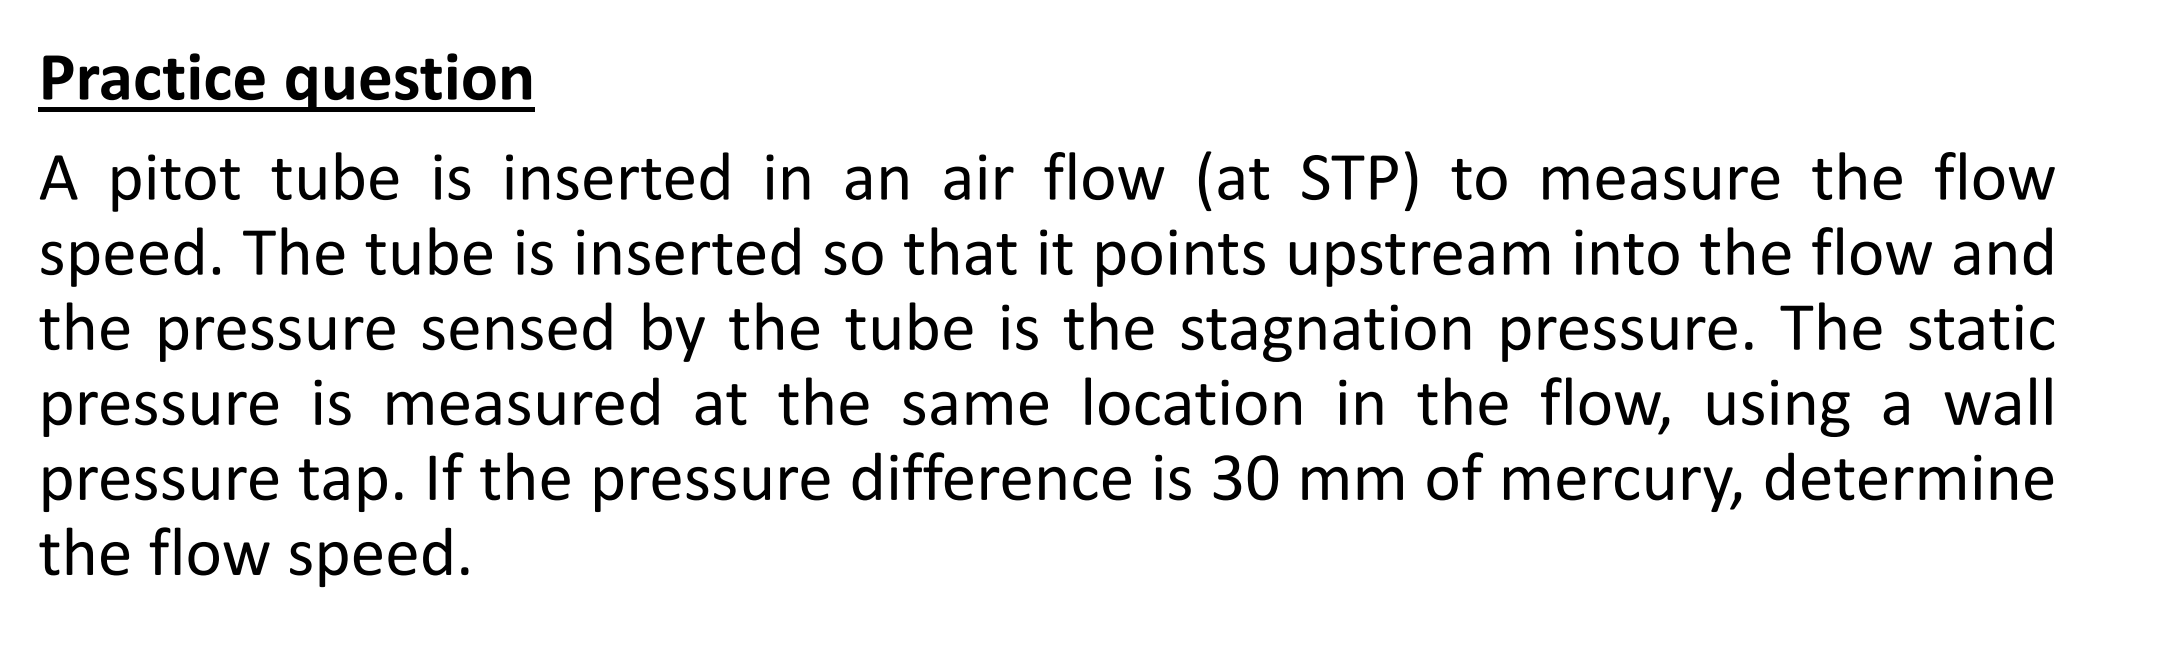 A pitot tube is inserted in an air flow (at STP) to measure the flow
speed. The tube is inserted so that it points upstream into the flow and
the pressure sensed by the tube is the stagnation pressure. The static
pressure is measured at the same location in the flow, using a wall
pressure tap. If the pressure difference is 30 mm of mercury, determine
the flow speed.
